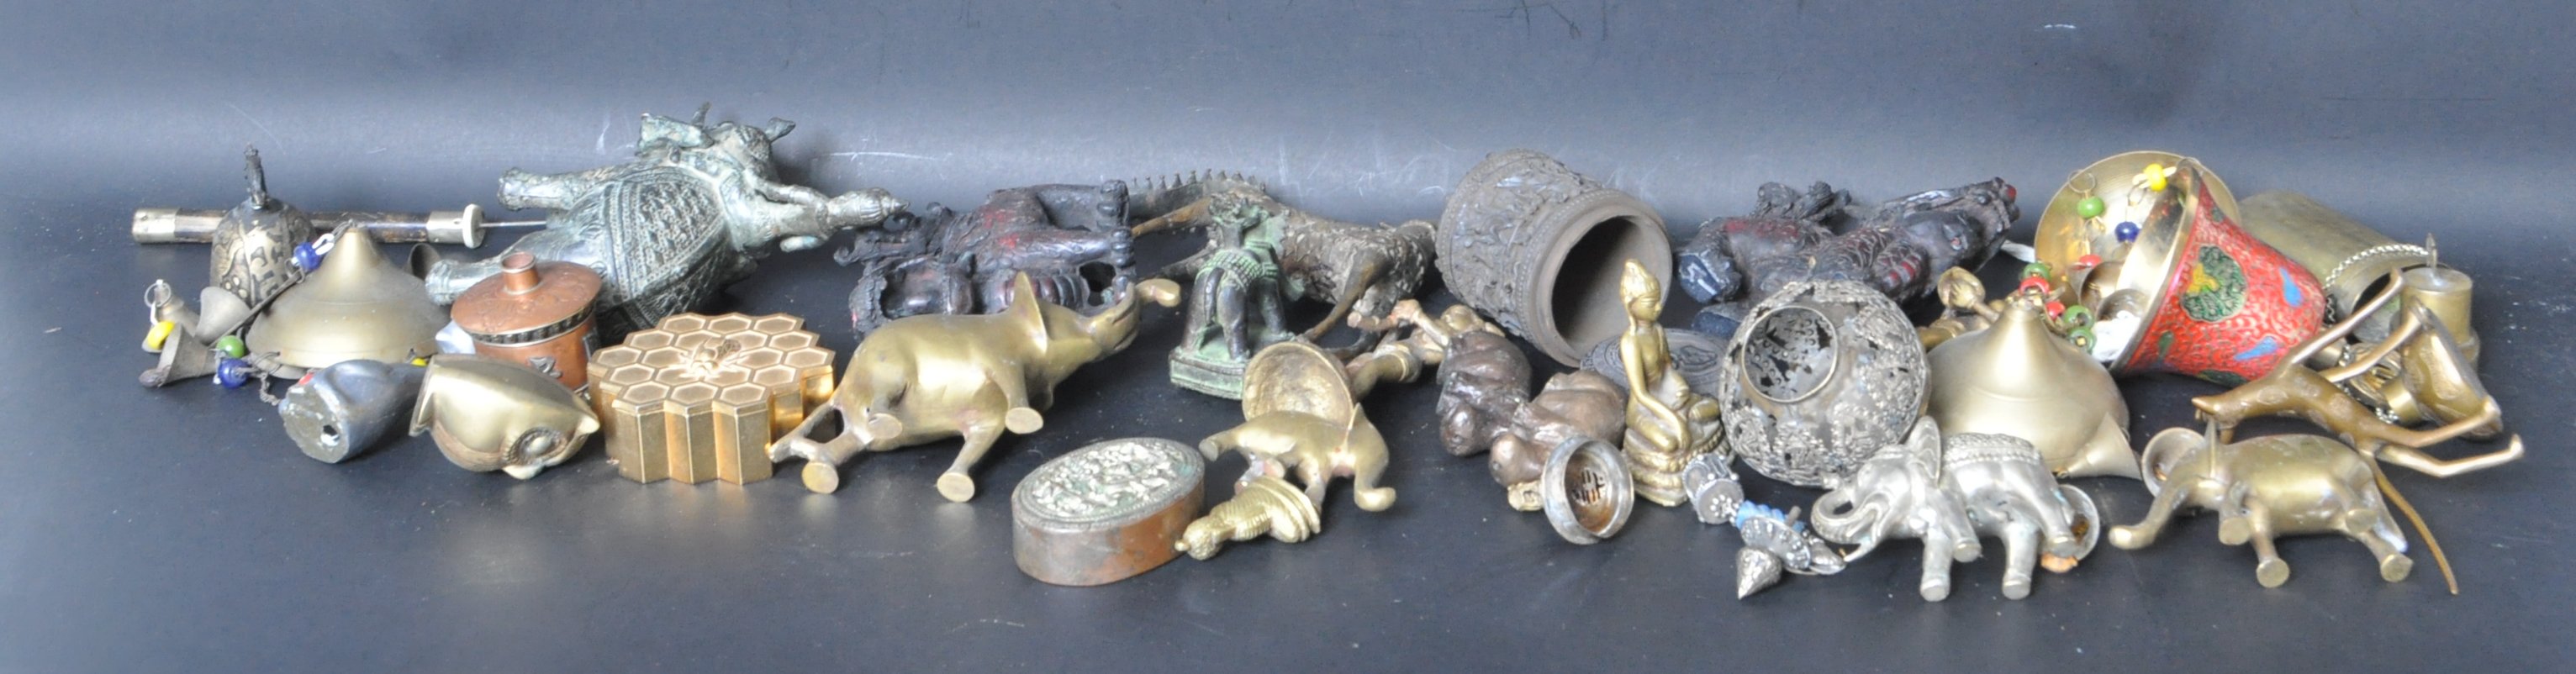 LARGE COLLECTION OF BRASS WARE AND HINDU FIGURINES - Image 9 of 9